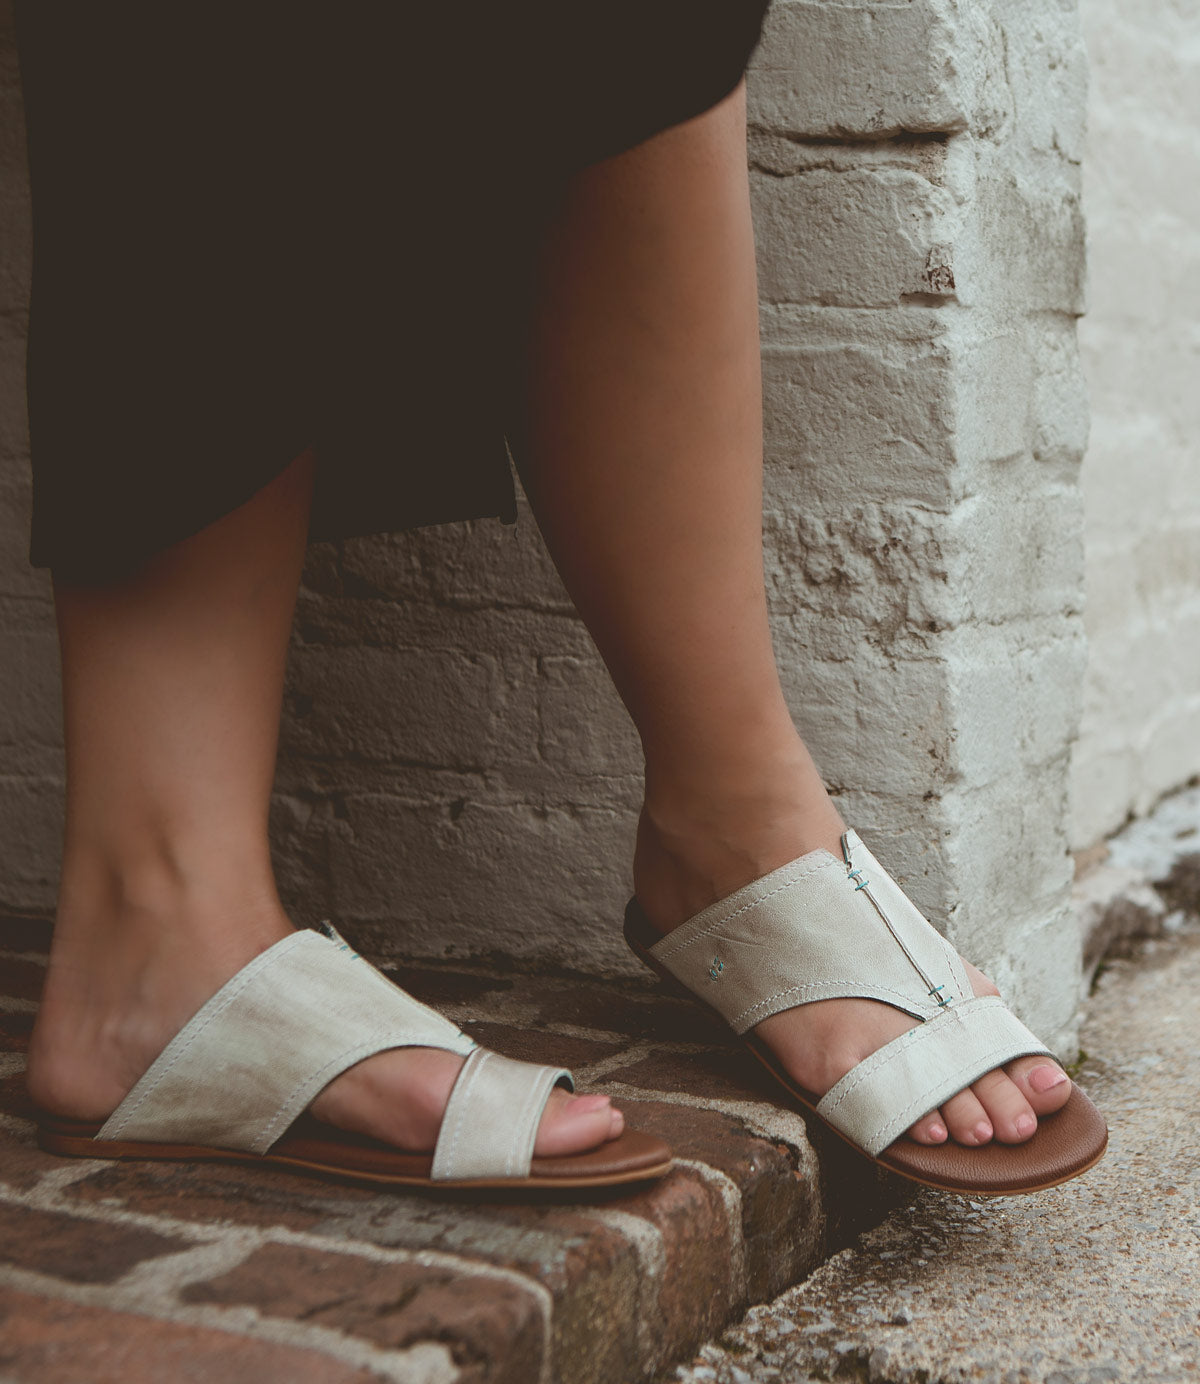 
                  
                    Person wearing all-leather, light-colored Roan Somerville summer slide sandals with a split toe design, standing on a brick surface near a white brick wall.
                  
                